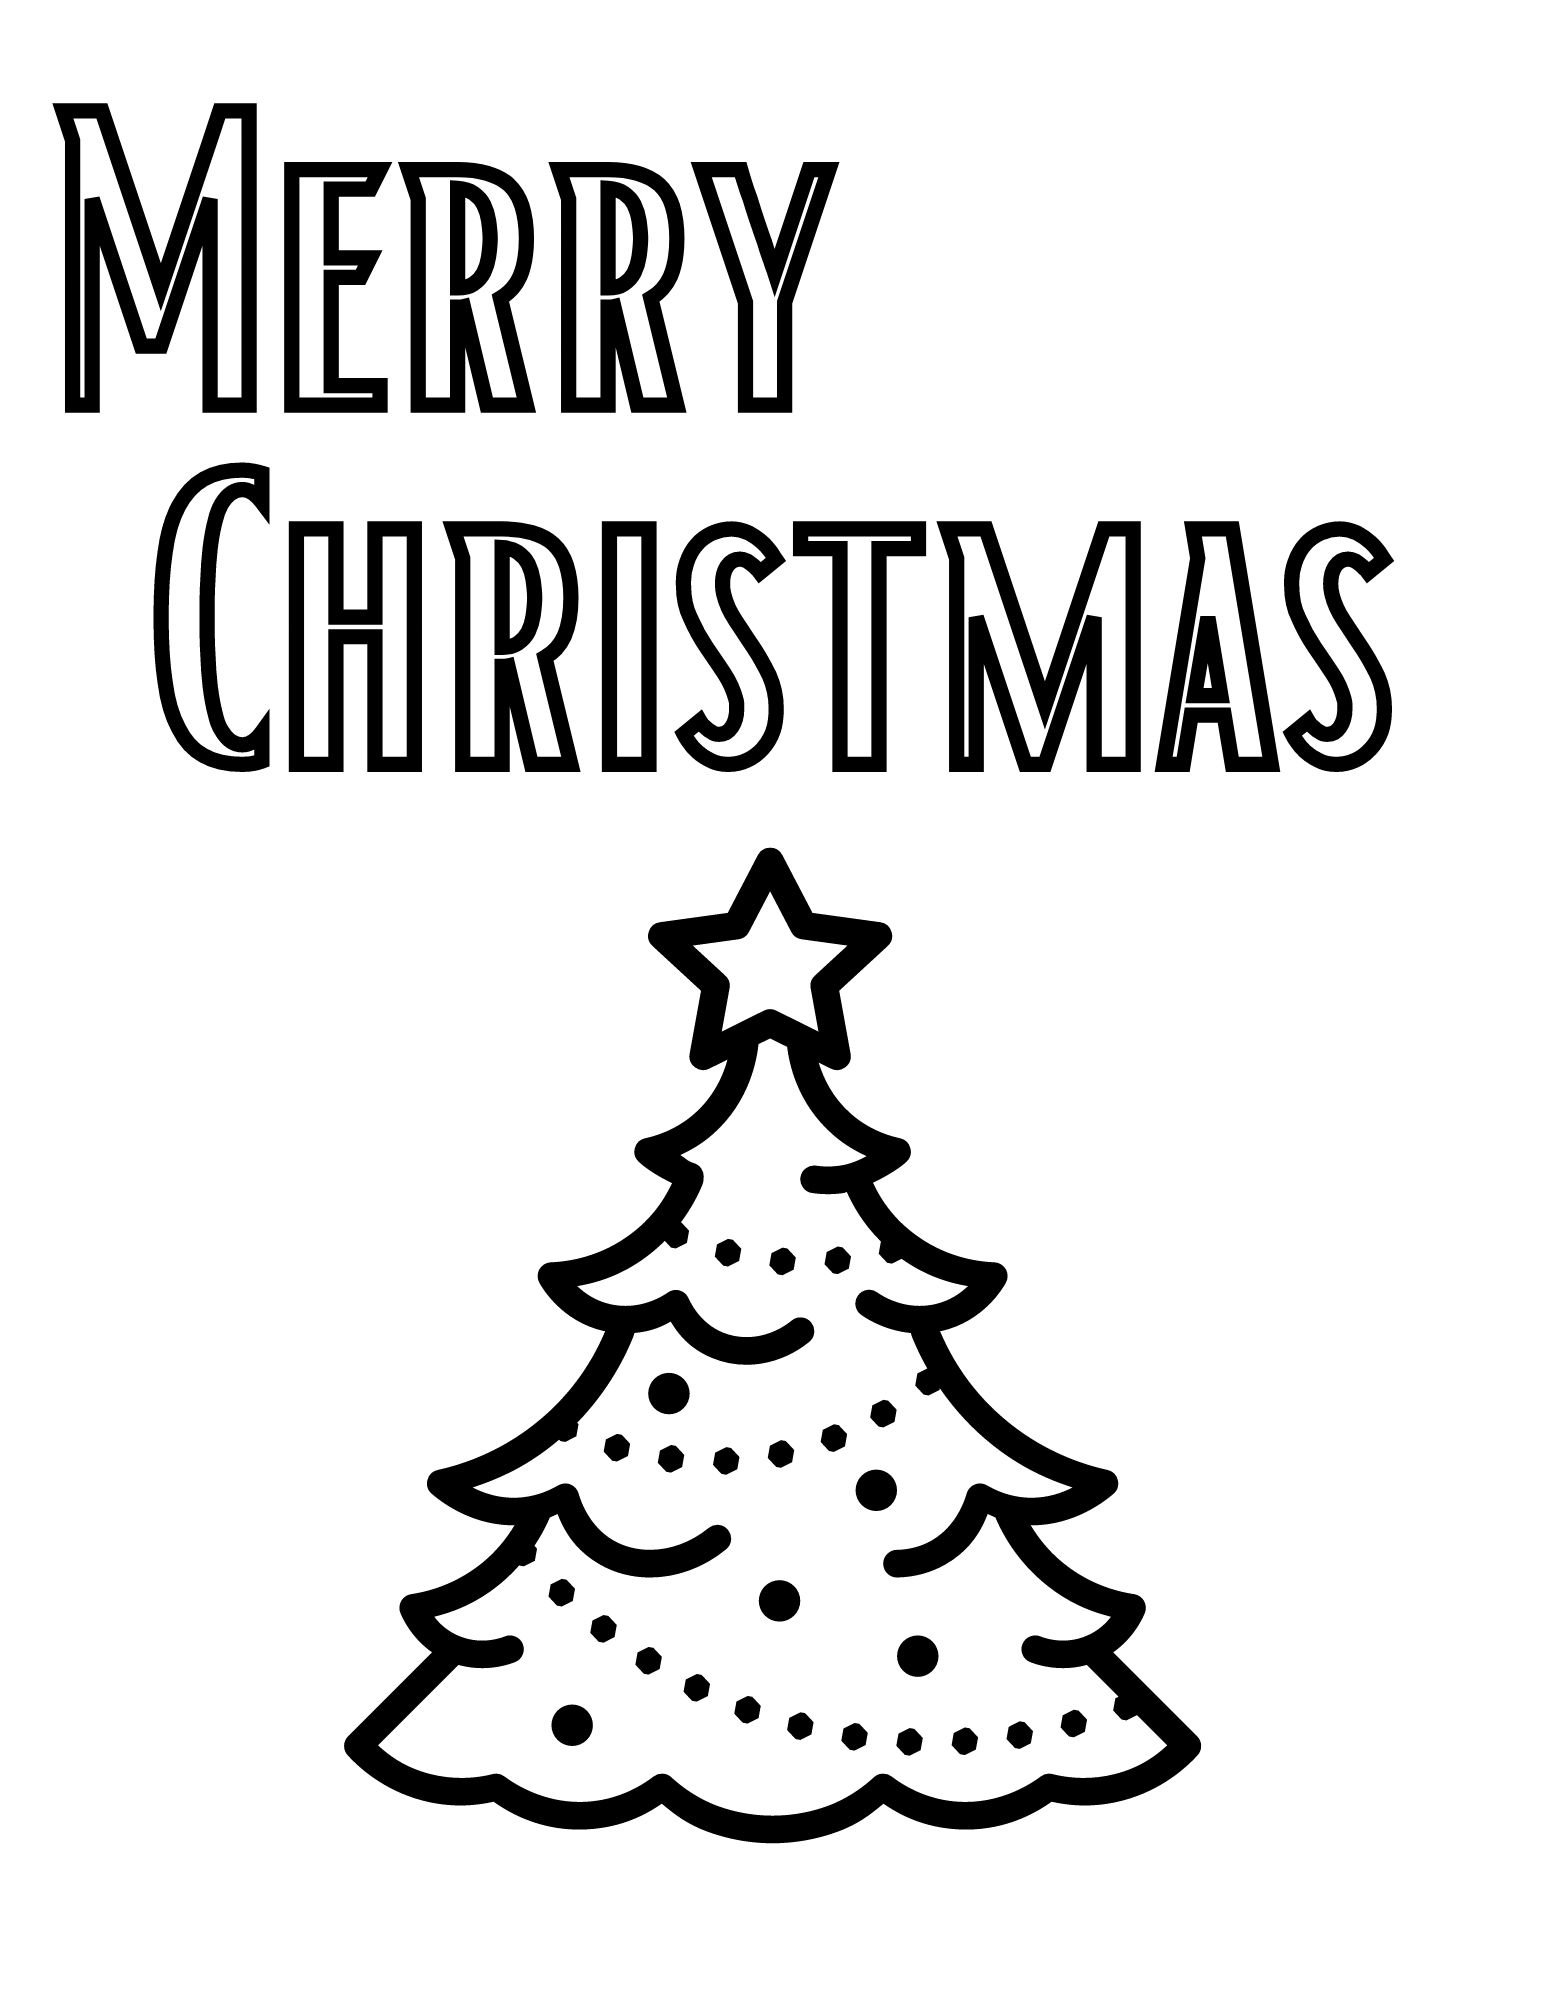 Christmas Coloring Page, Merry Christmas Coloring, Family Activity,family  Fun Night, Christmas Tree Coloring Page, Arbol De Navidad - Etsy